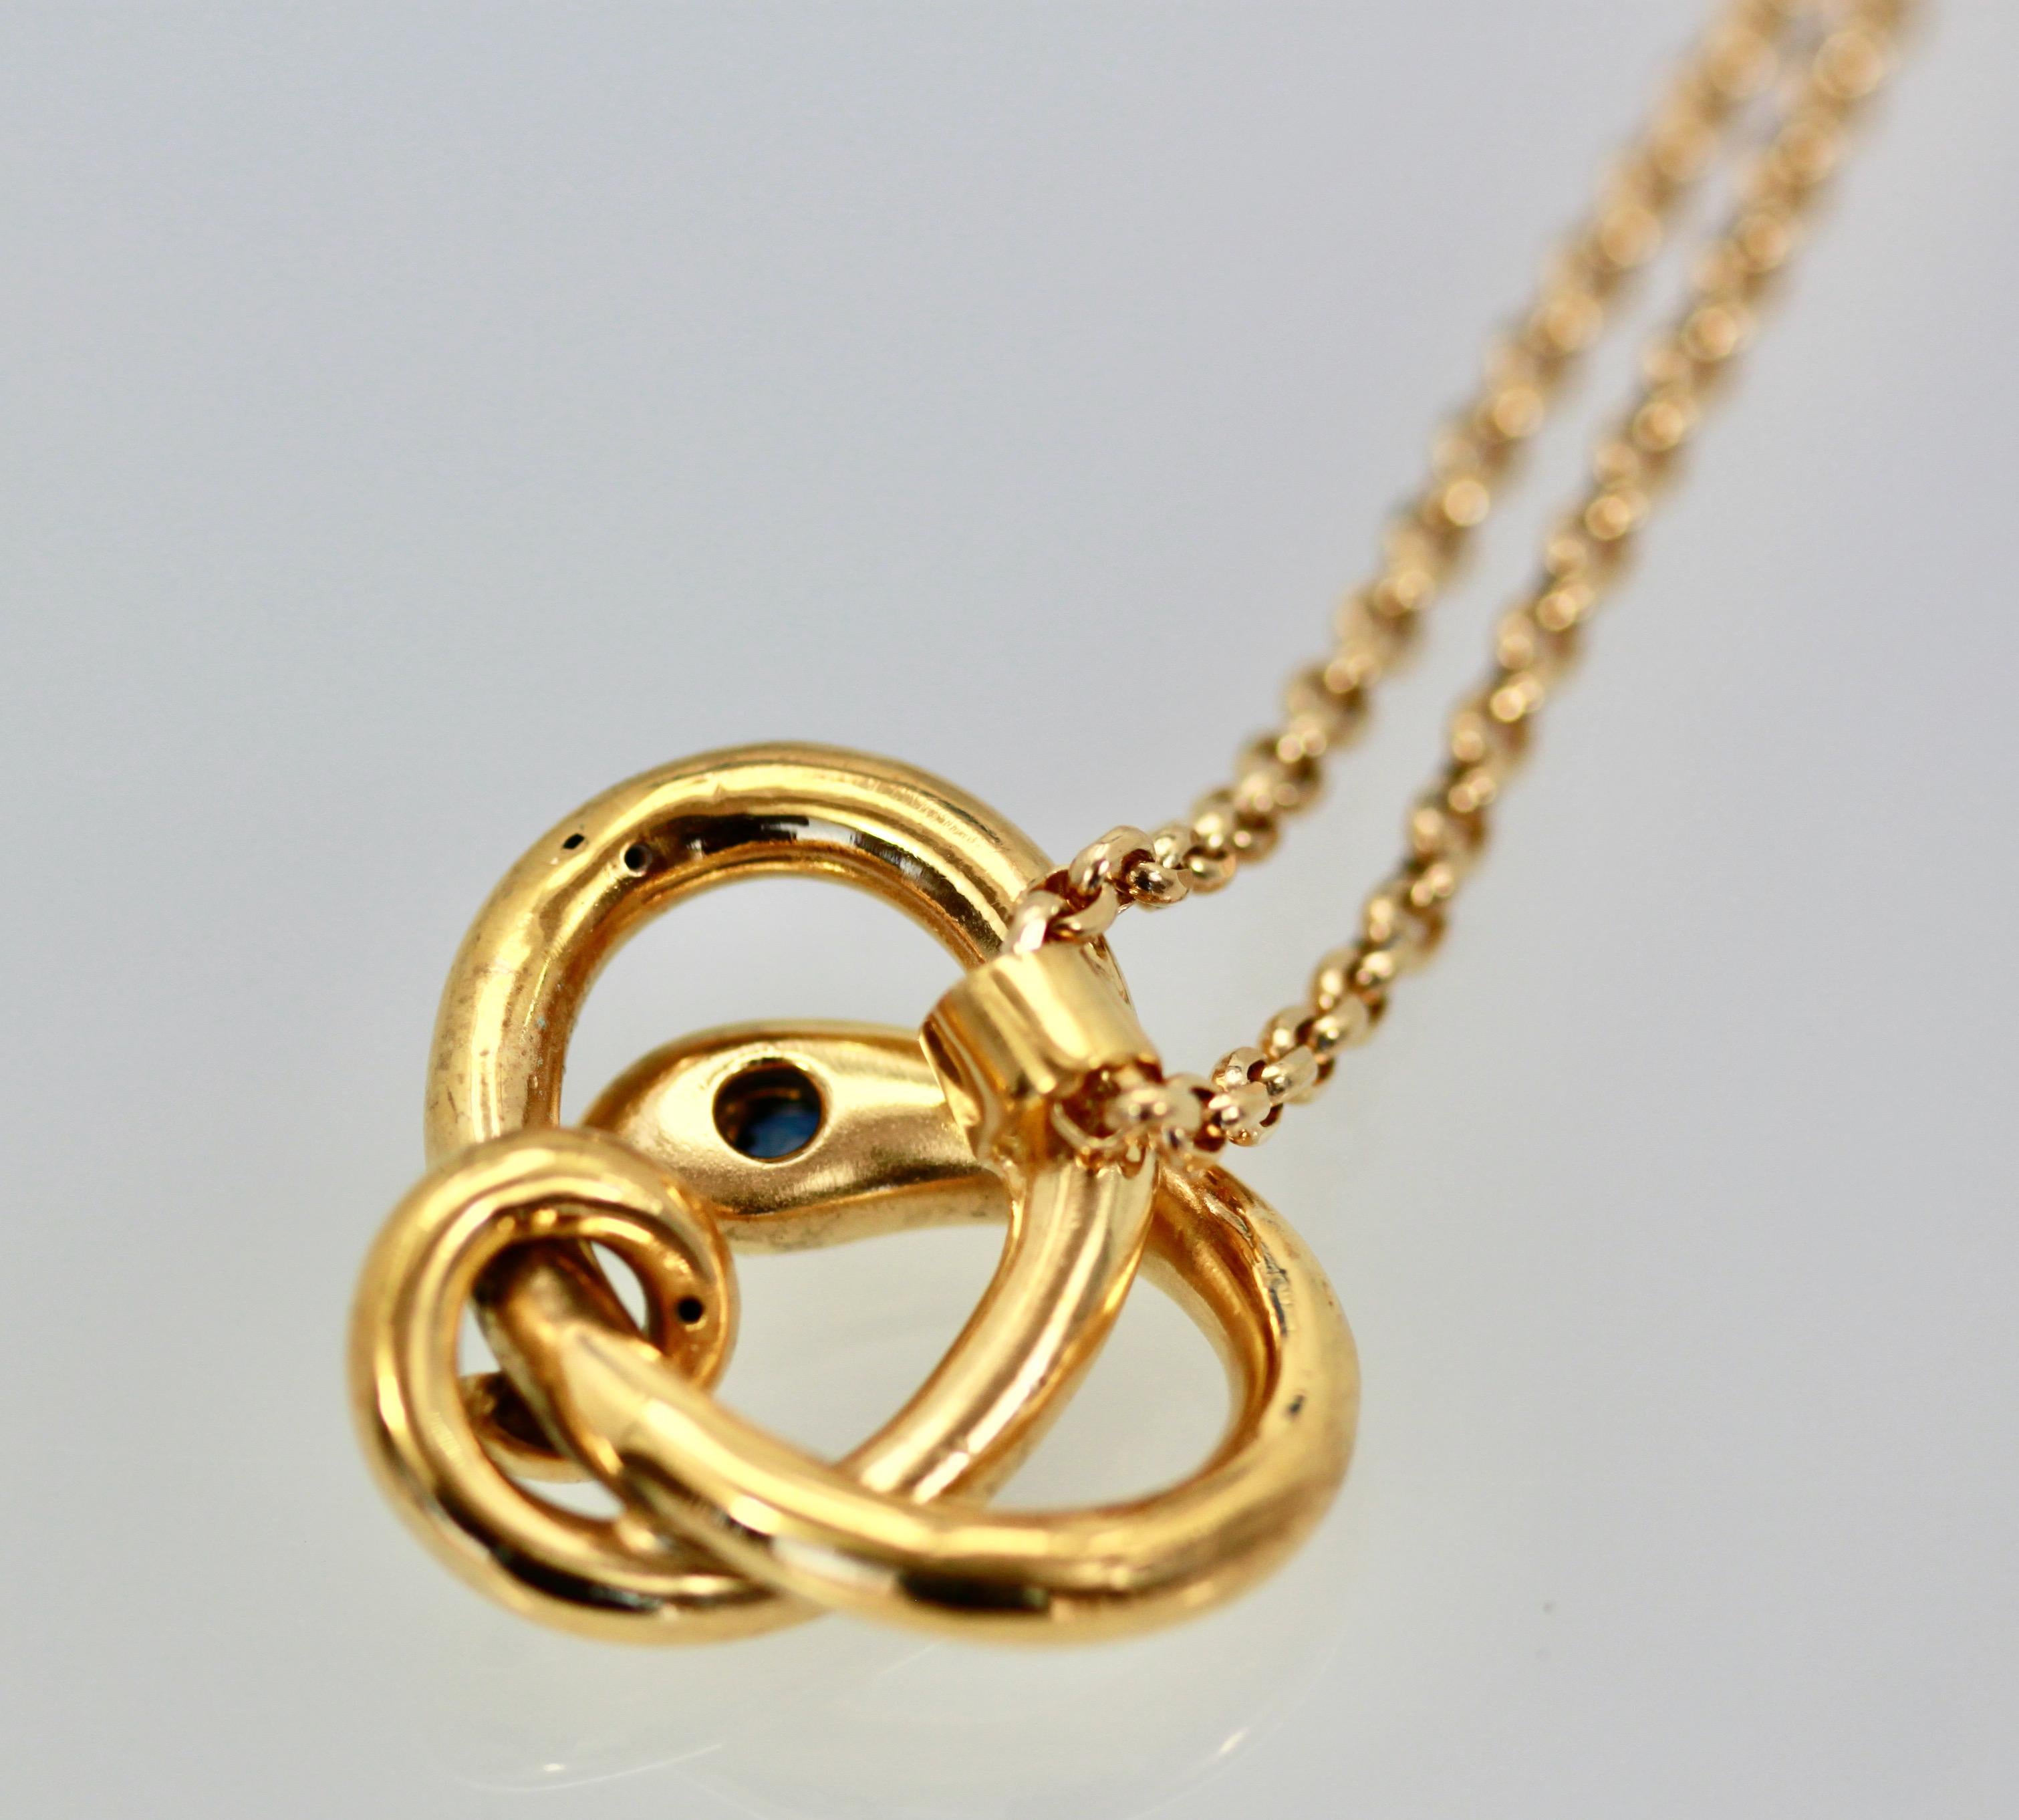 This lovely Snake pendant necklace is simple yet very special.  As many of you know I love snake jewelry and probably have the largest collection of Snake jewelry.  Whenever I see a snake if it is something I do not have I will purchase it.  During